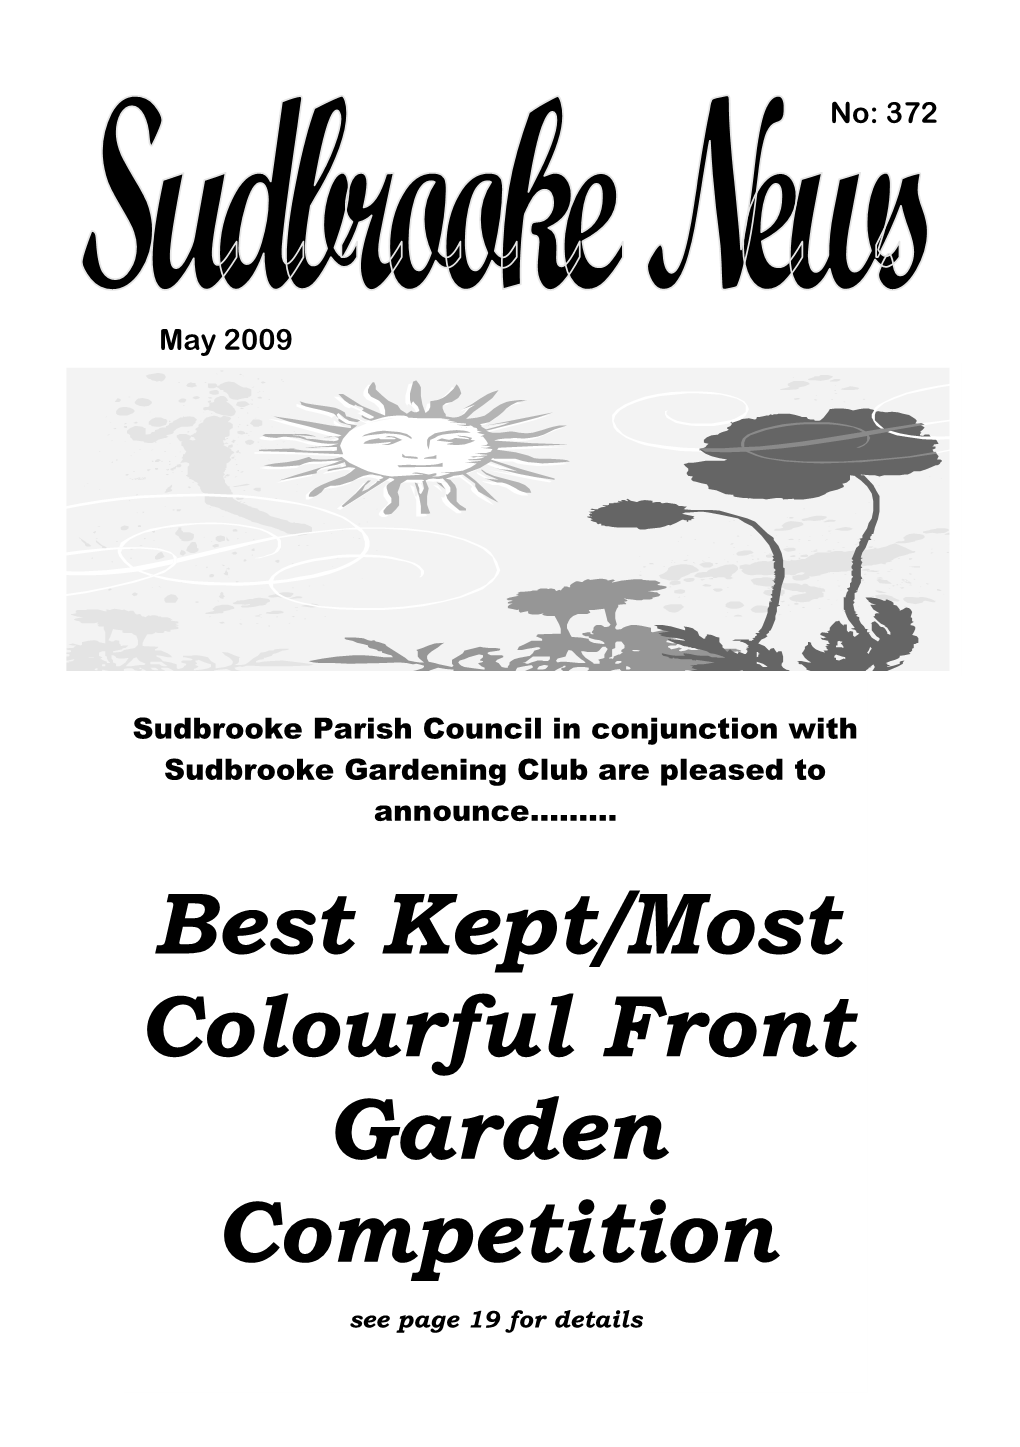 Best Kept/Most Colourful Front Garden Competition